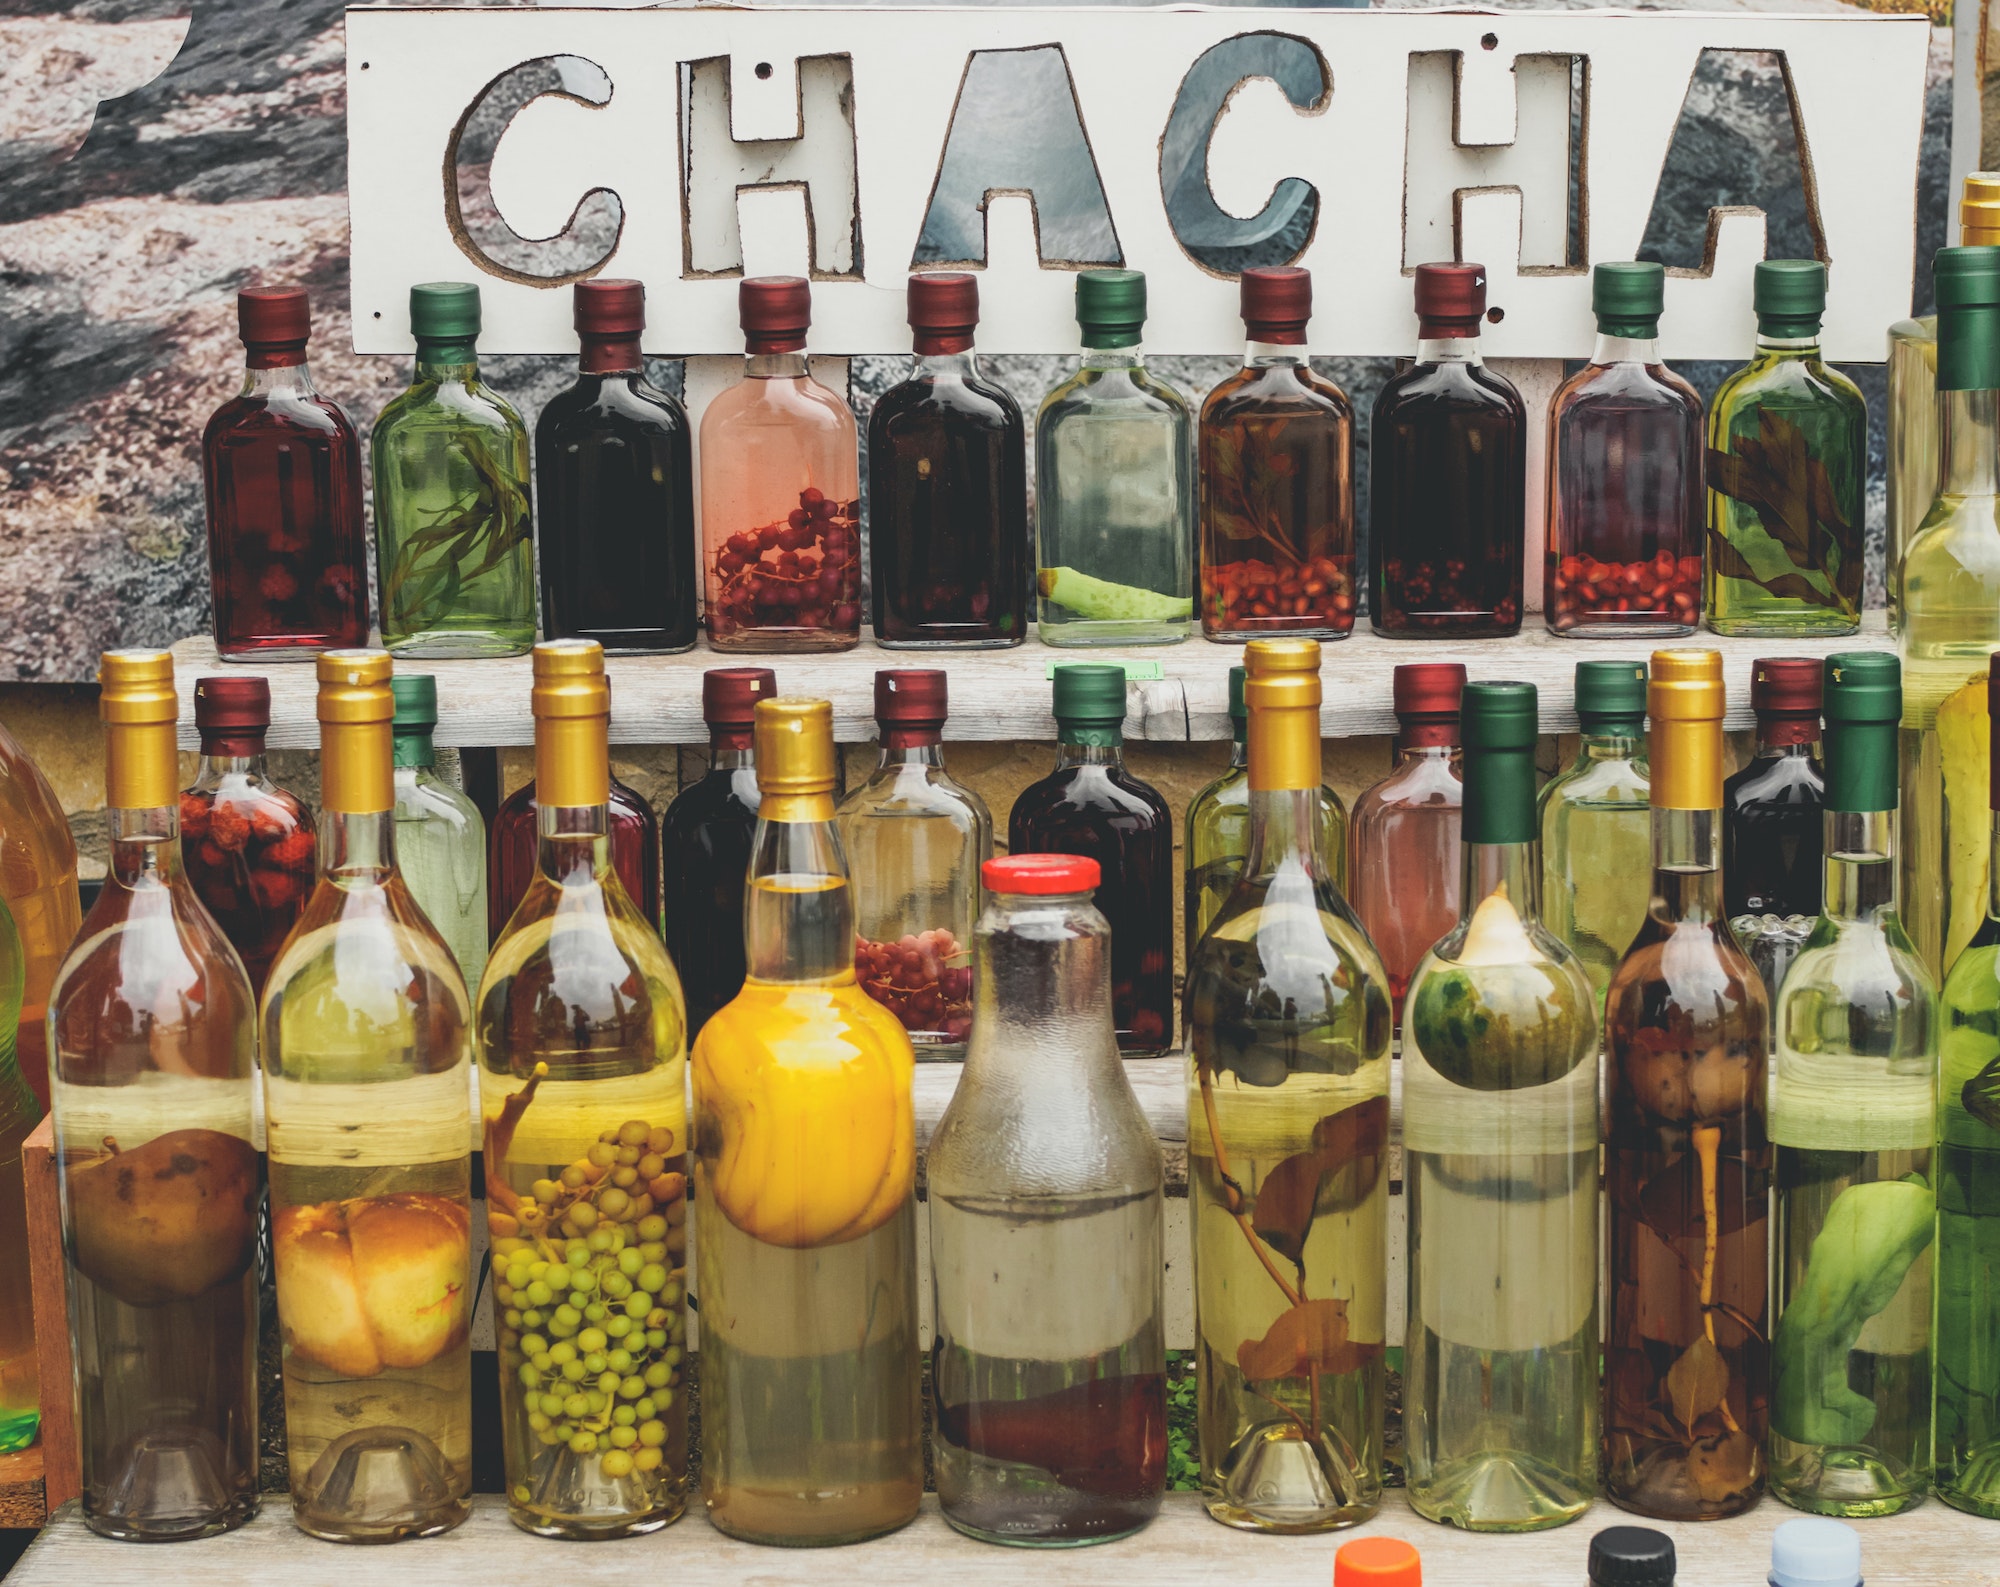 traditional georgian alcohol drink chacha in bottles with different fruits and herbs selling at